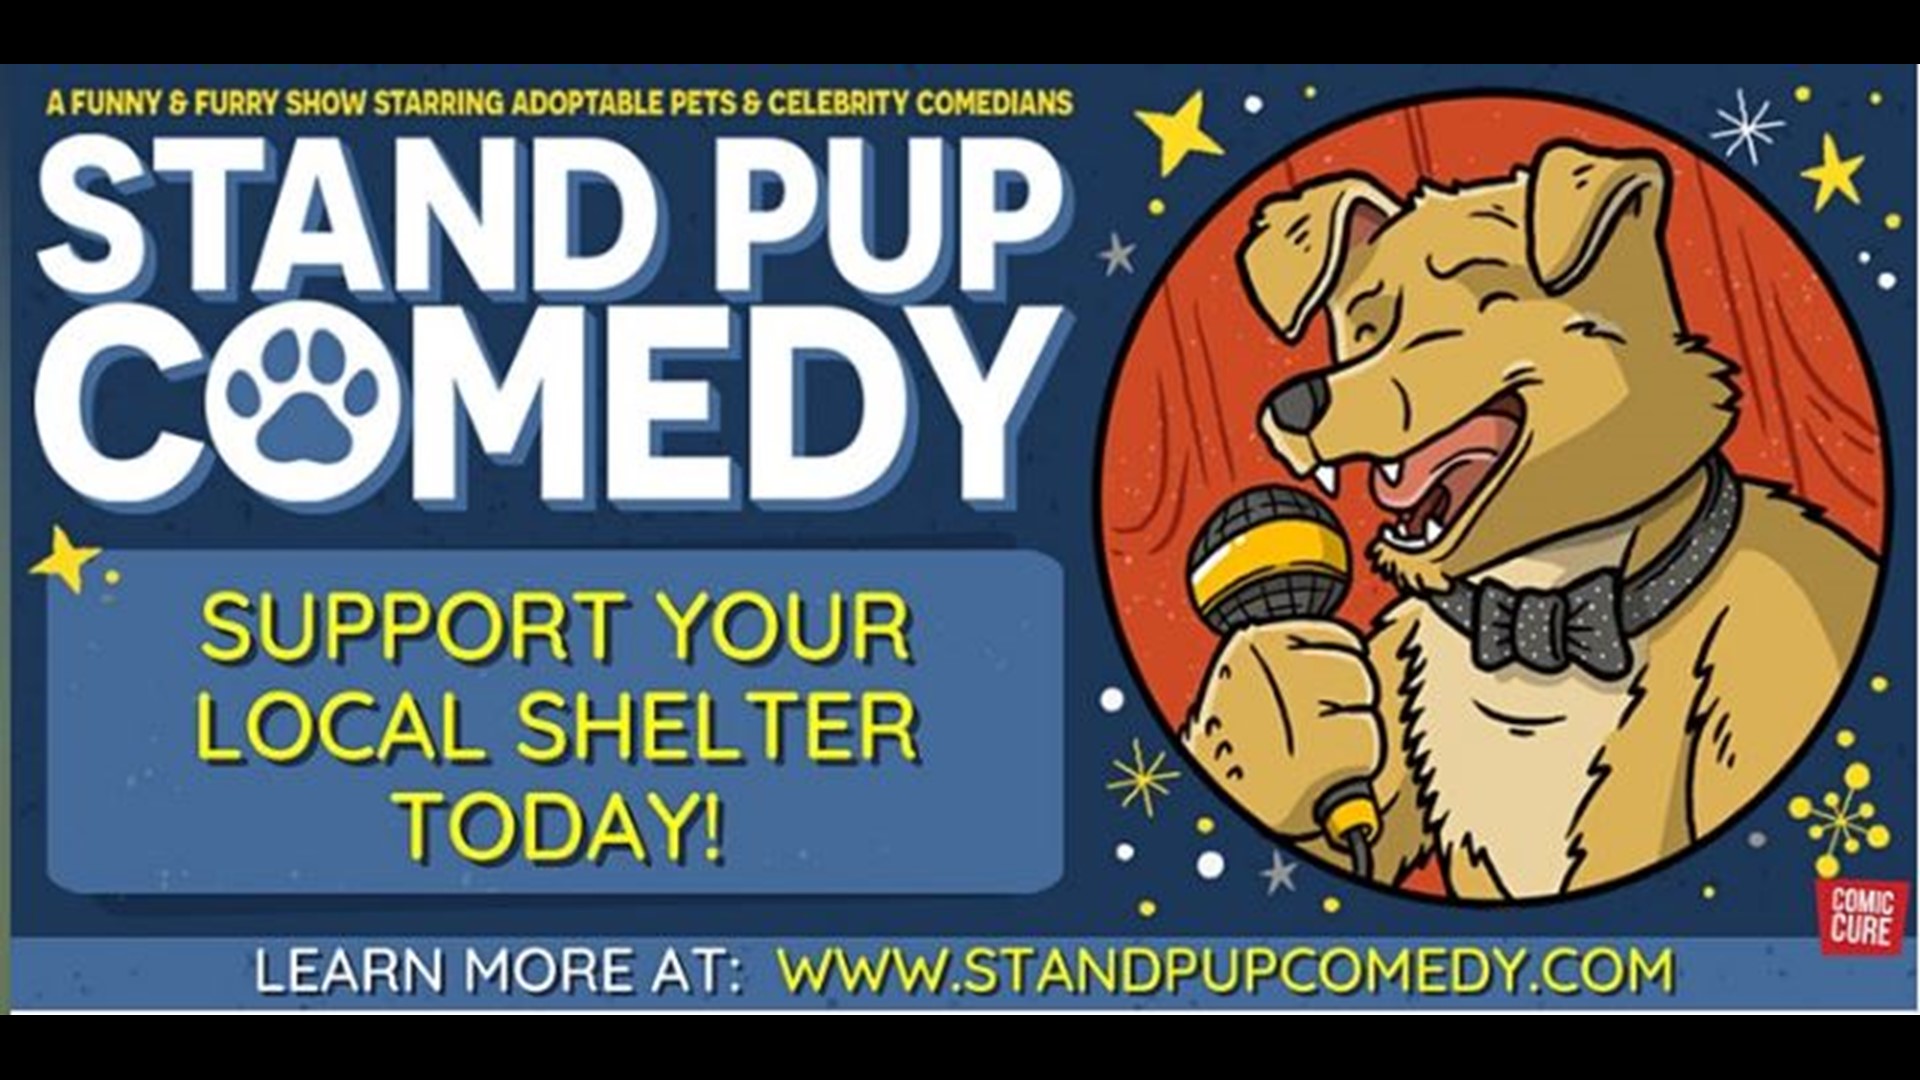 Get laughs and check out cute pets during this comedy show